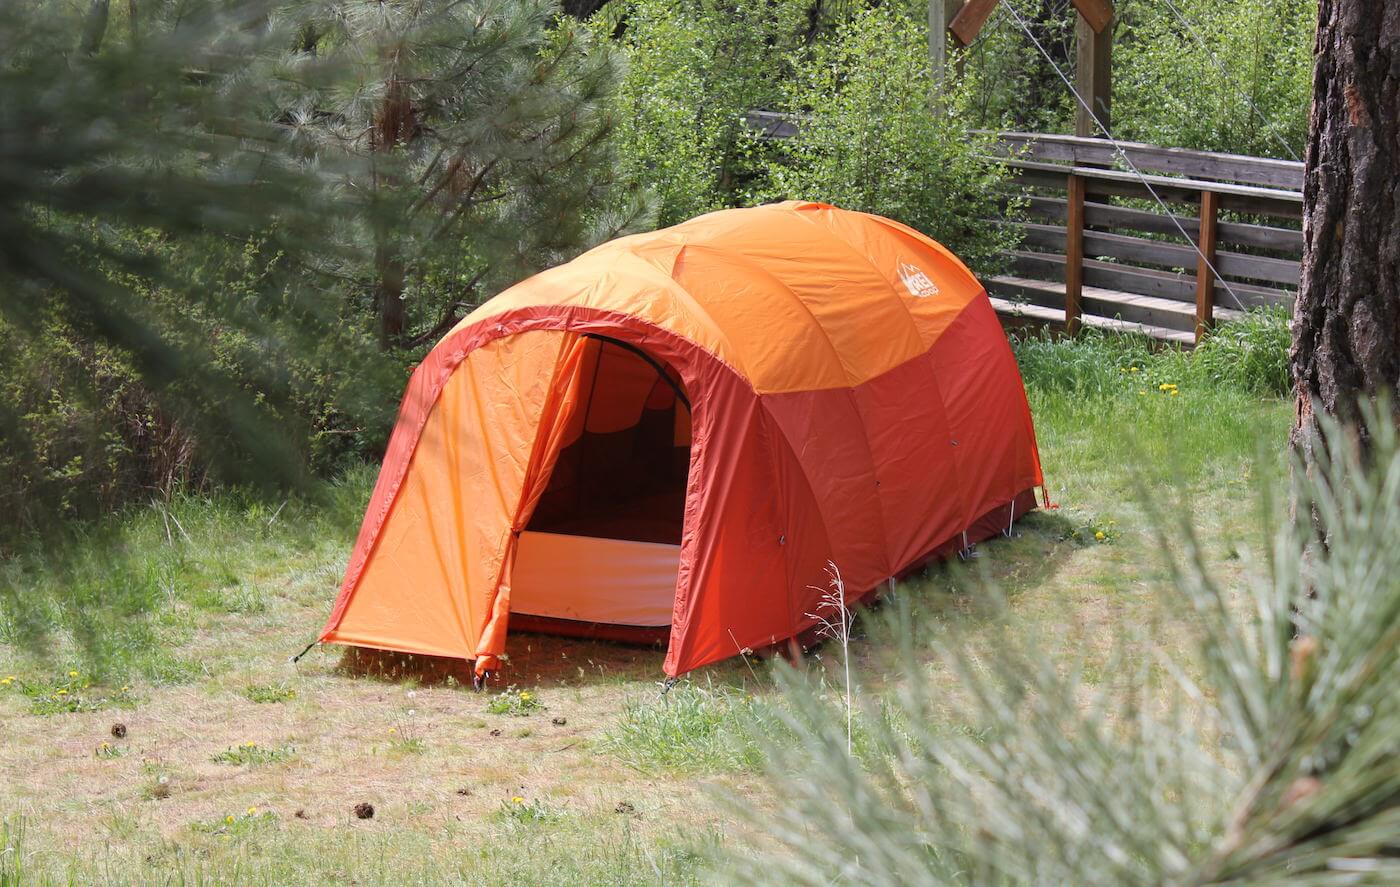 This photo shows the REI Co-op Kingdom 8 Tent setup for camping.